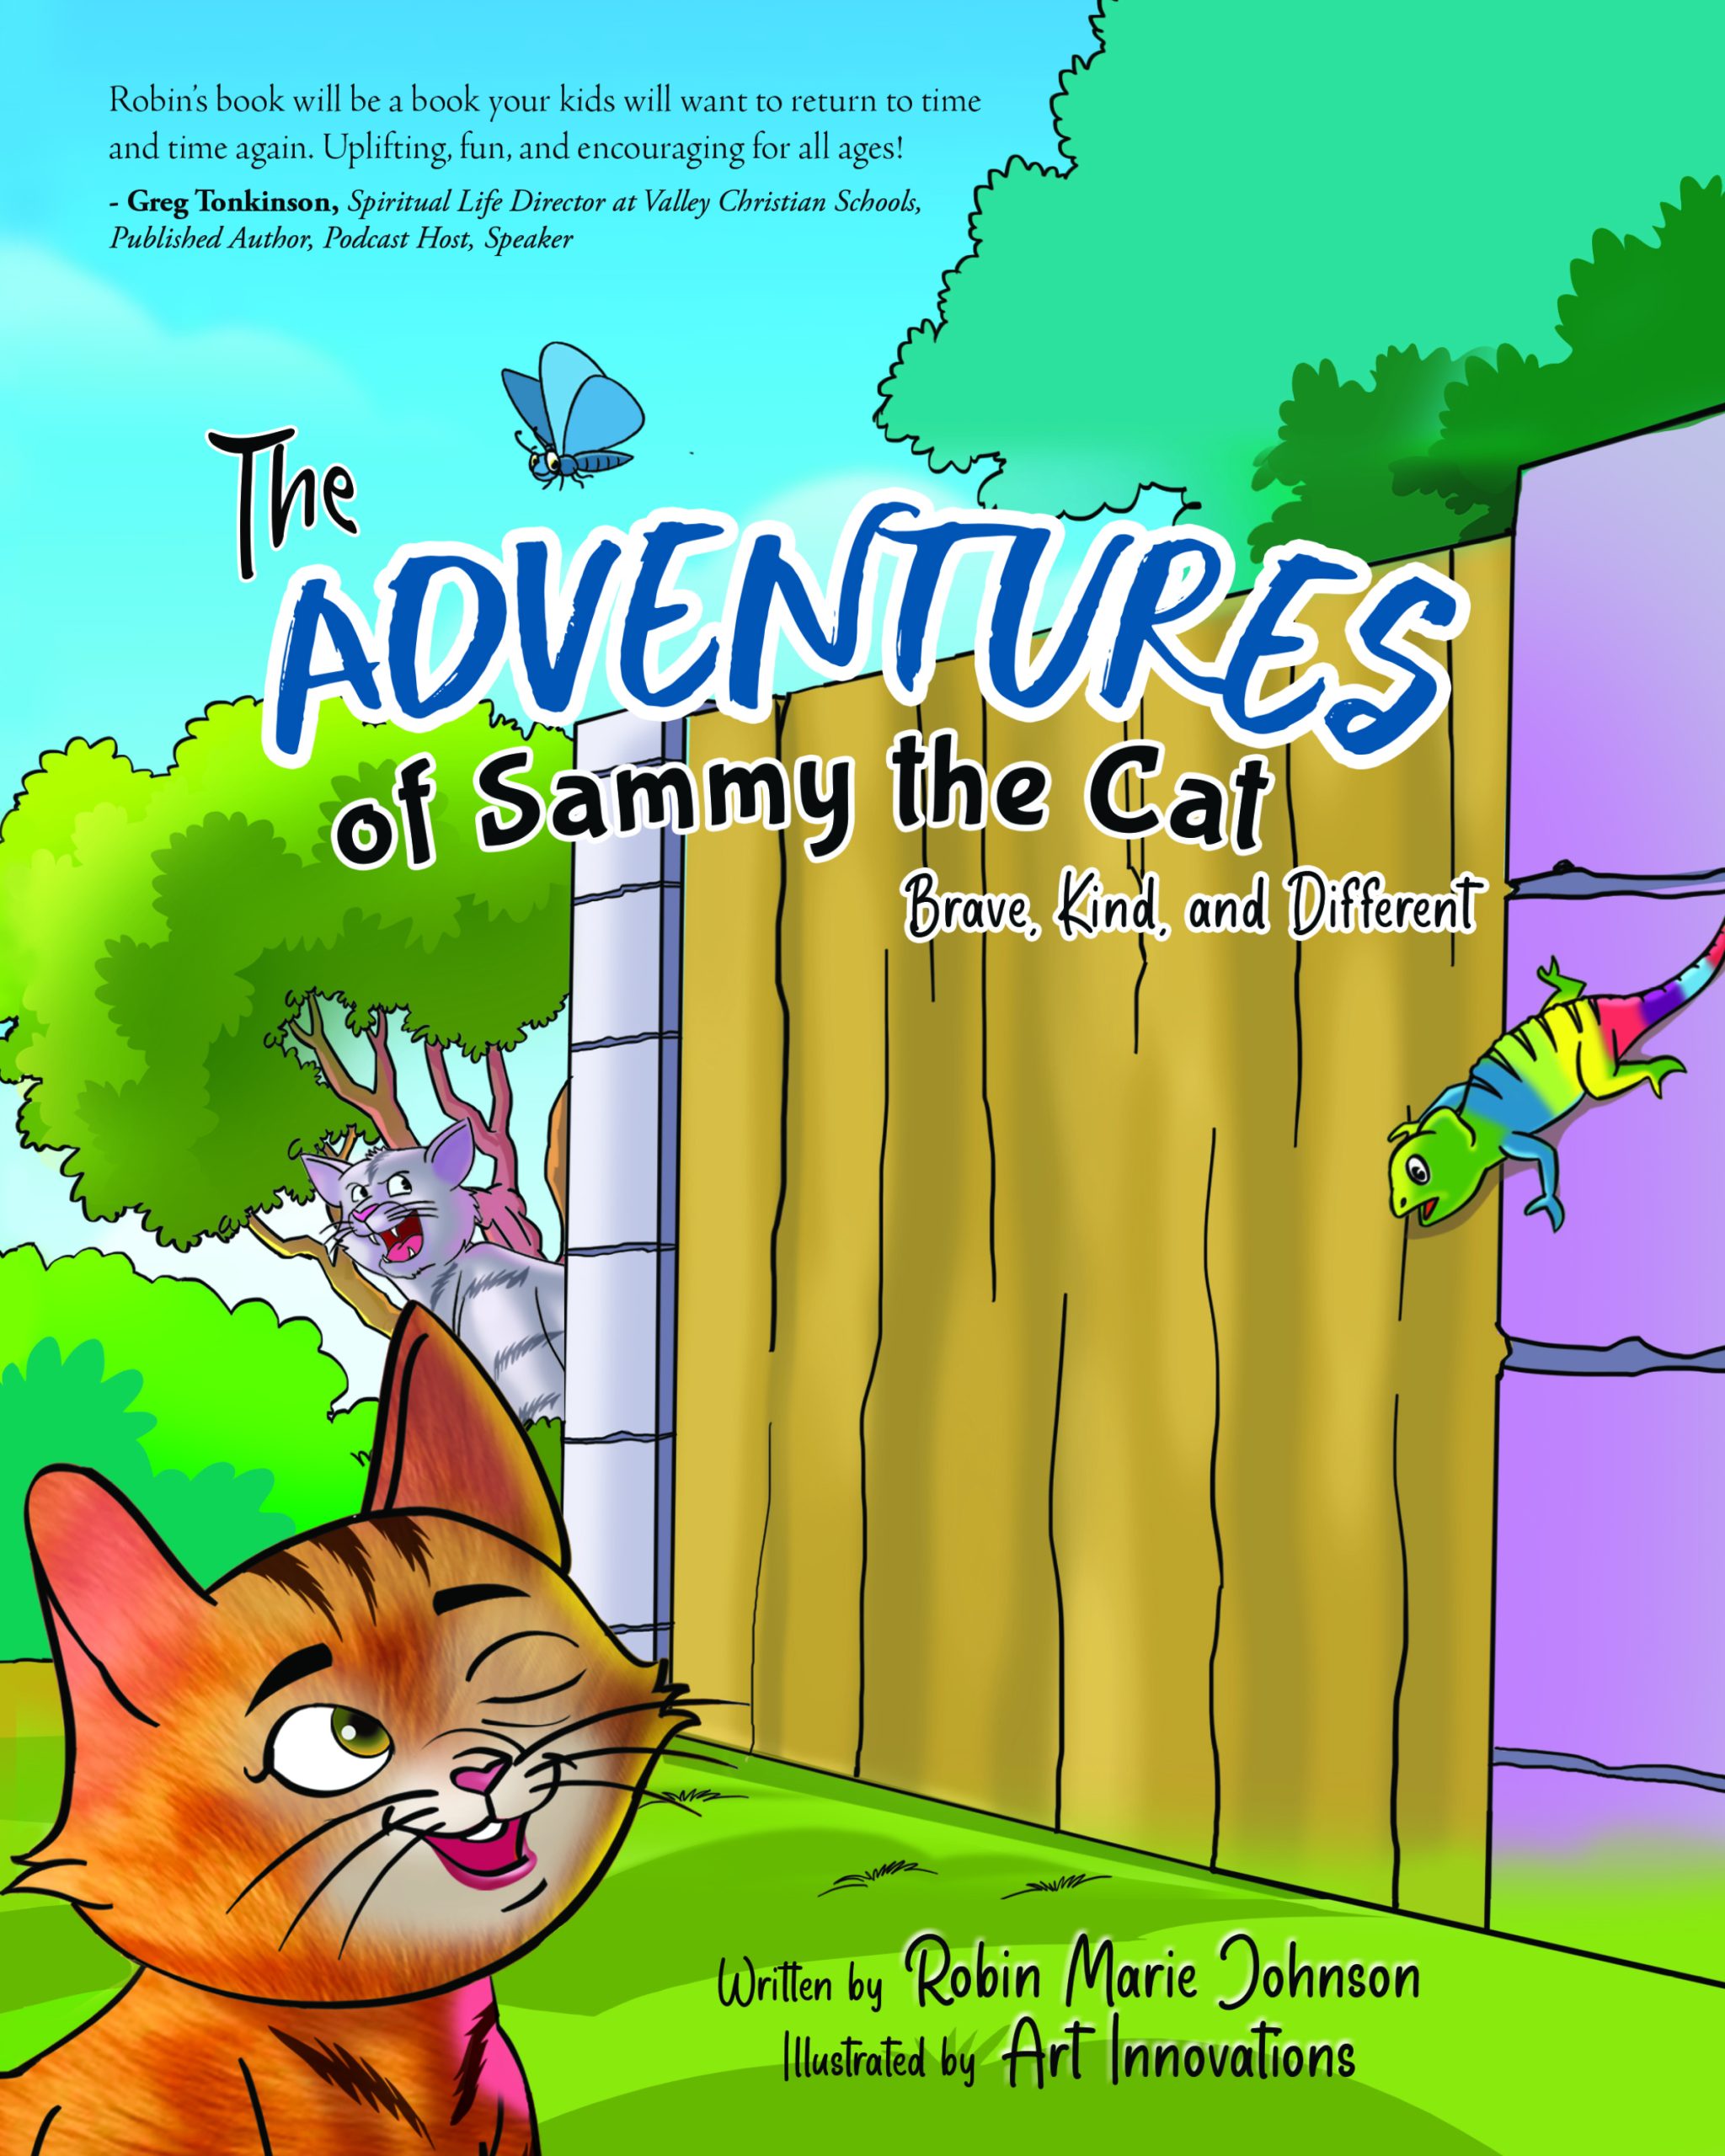 the-adventures-of-sammy-the-cat-front-cover-final (1)